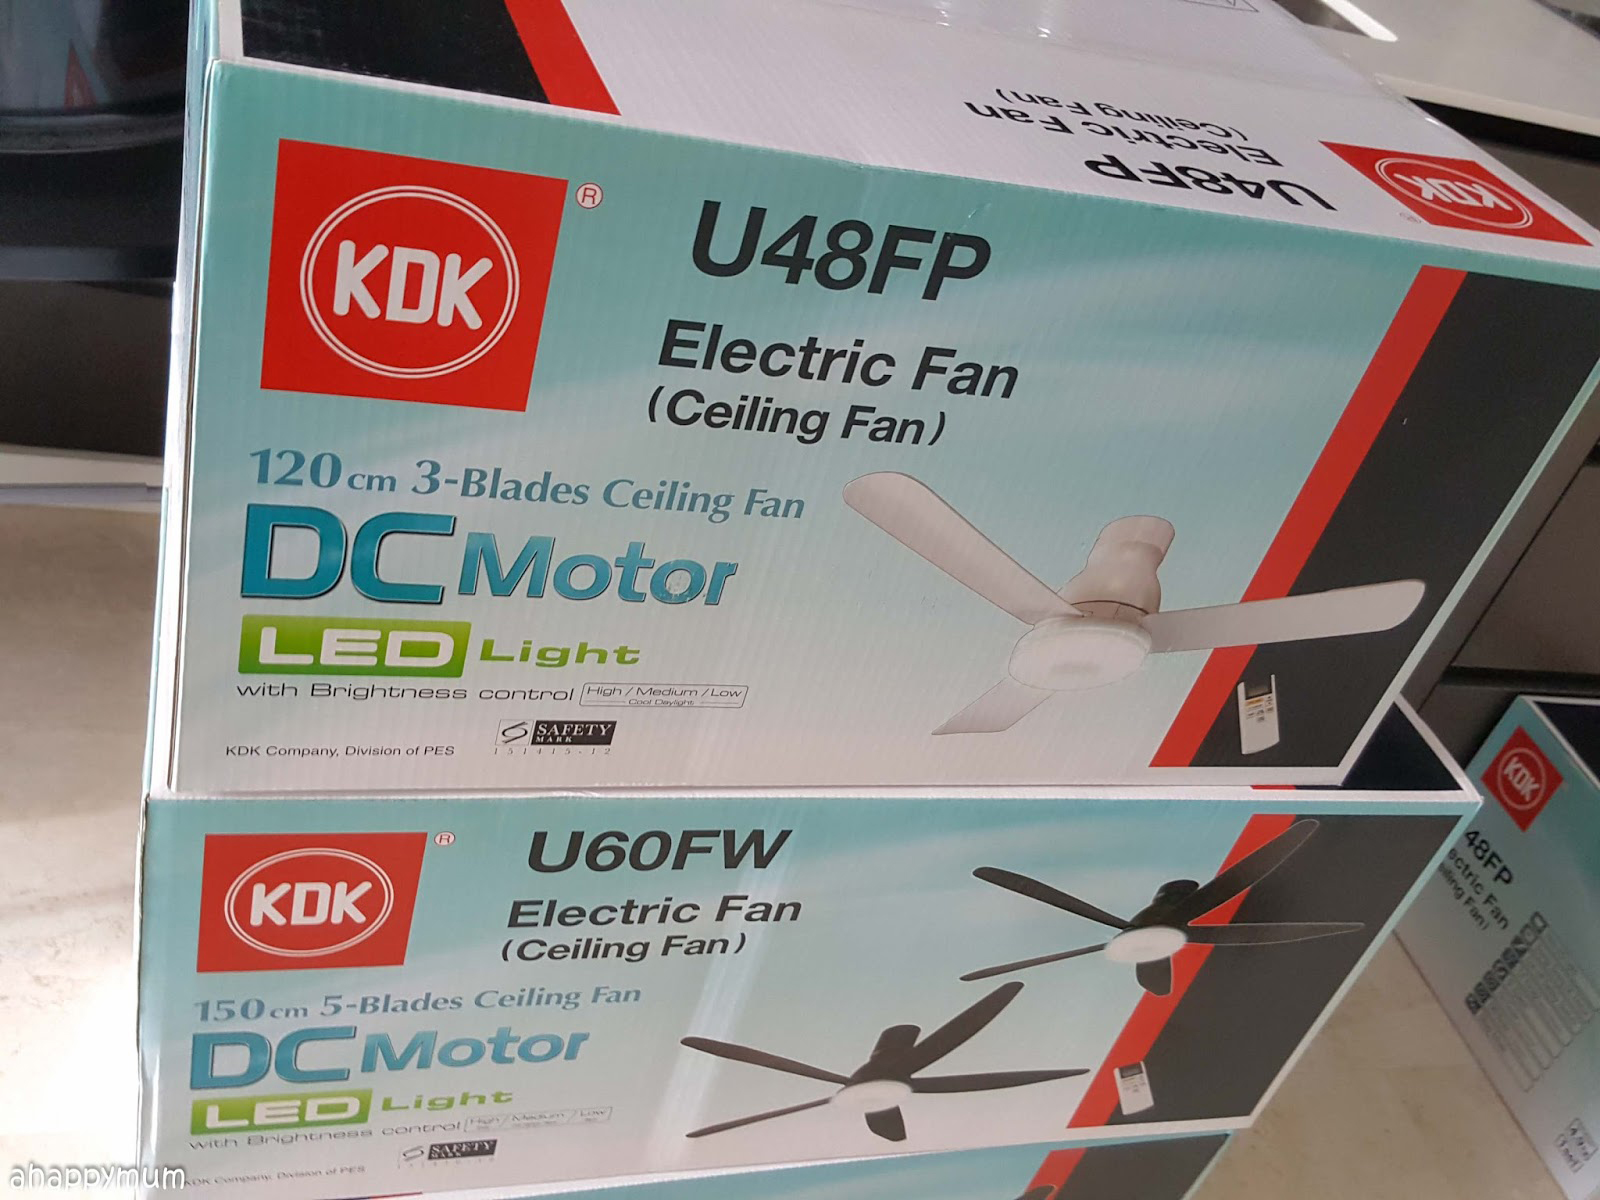 Kdk Ceiling Fan For All Your Needs